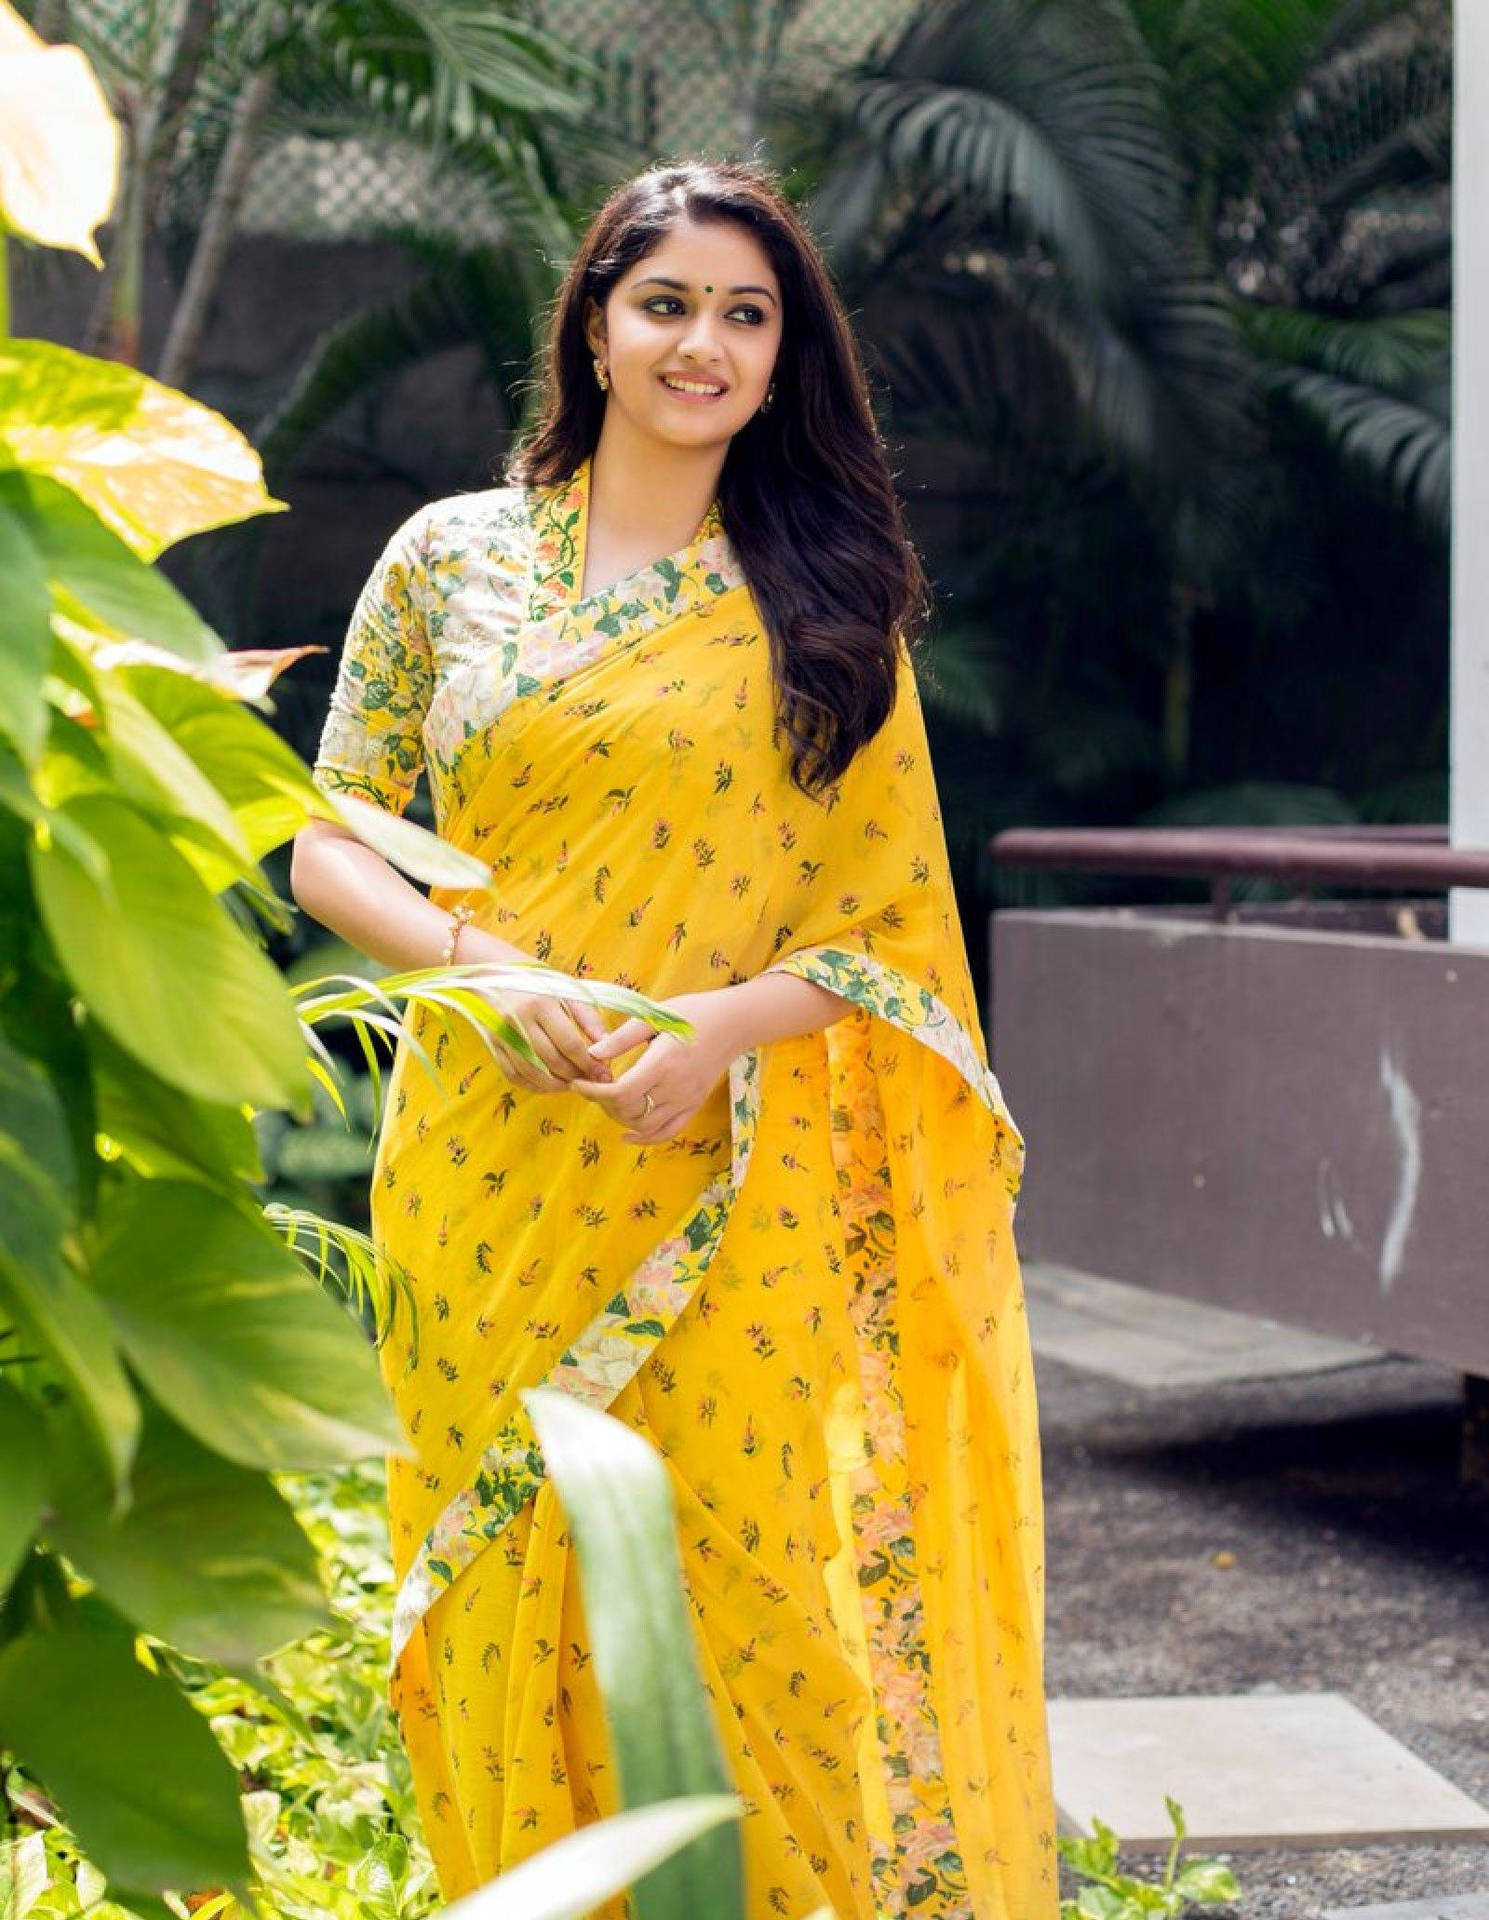 Keerthi Suresh In Sari By A Plant HD Wallpaper